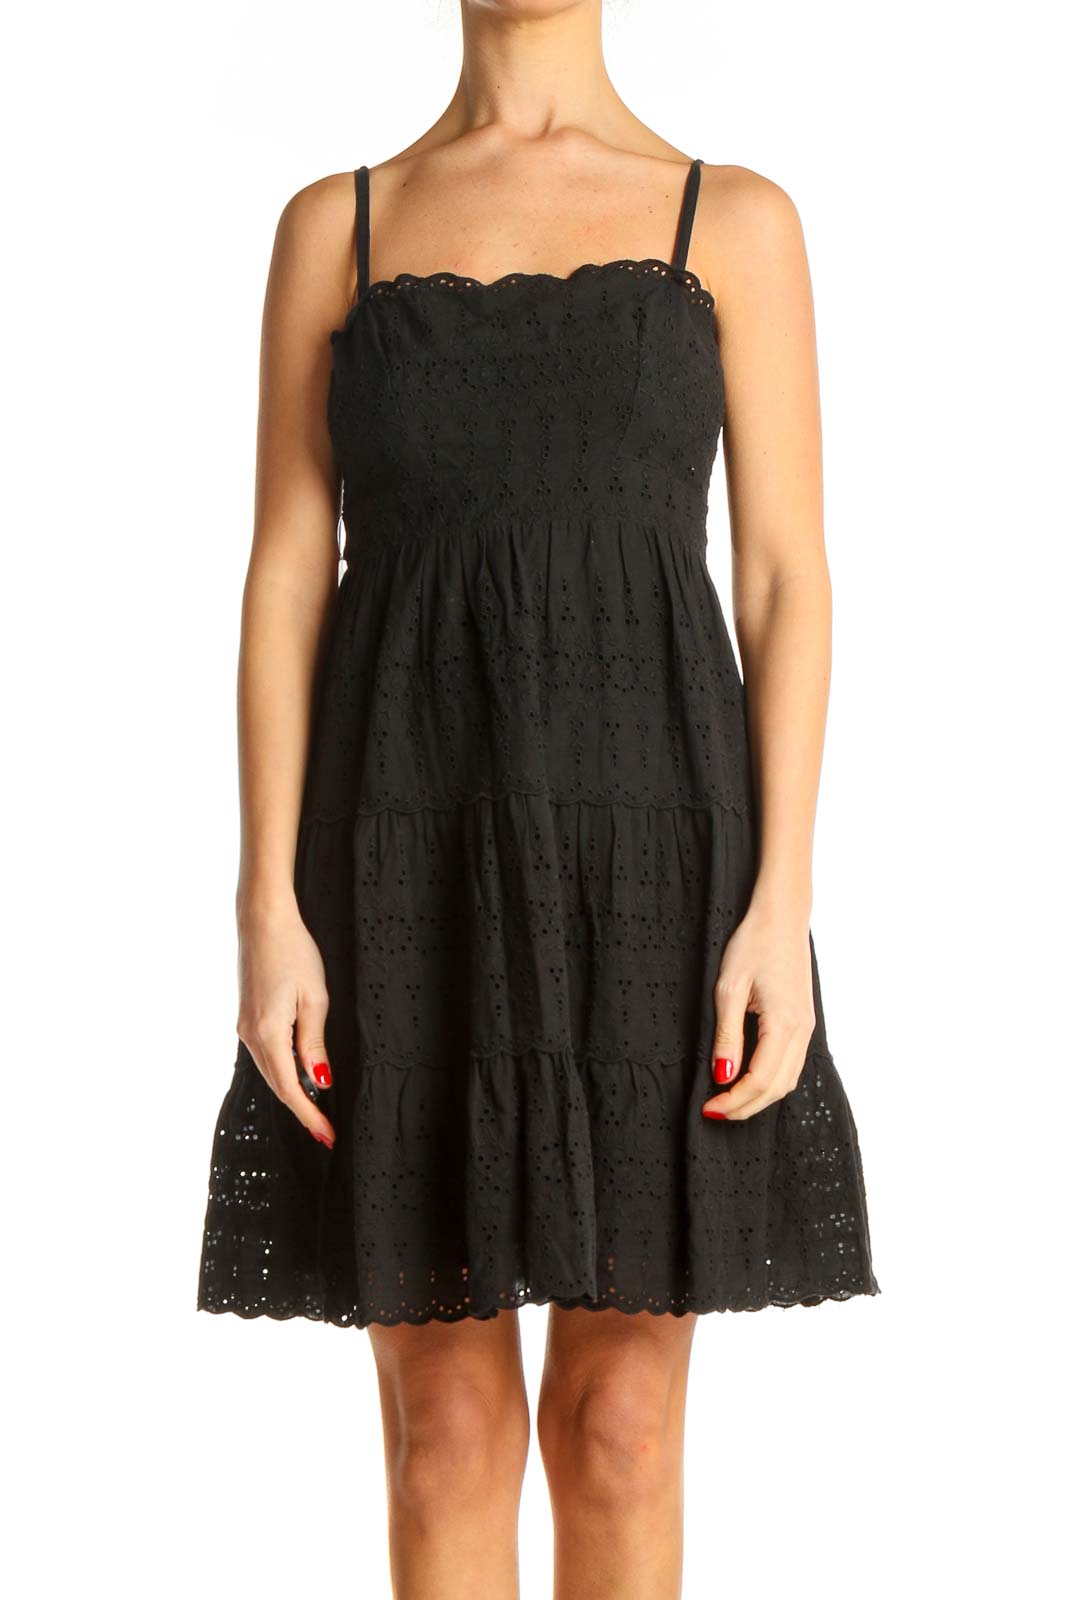 Black Lace Chic Fit & Flare Dress Front